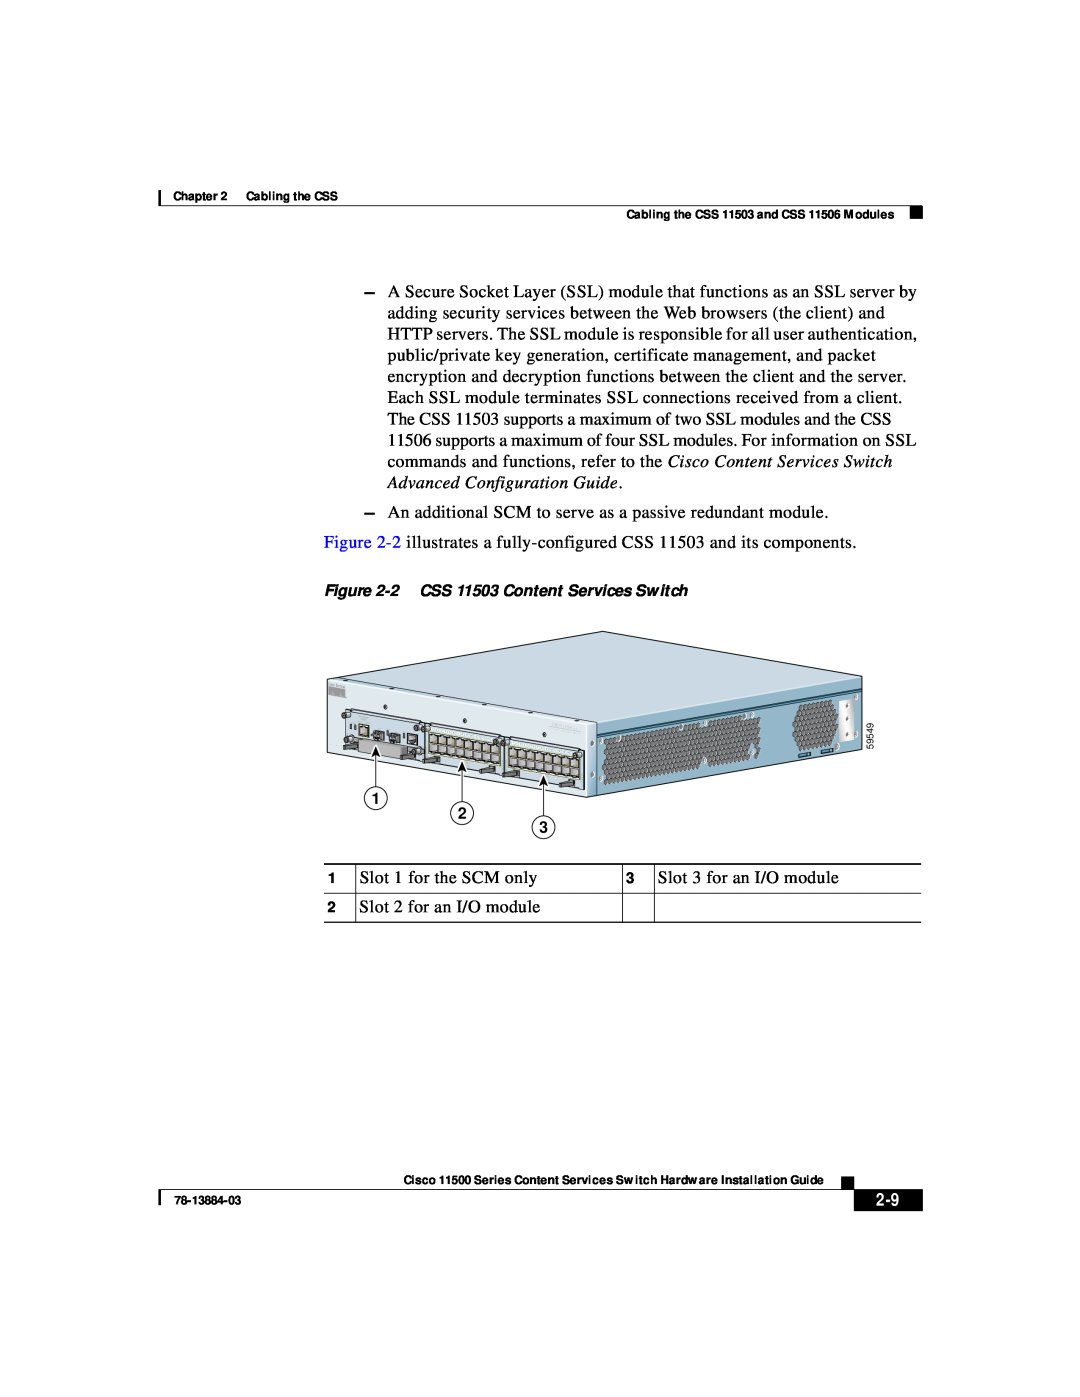 Cisco Systems 11500 Series manual An additional SCM to serve as a passive redundant module 